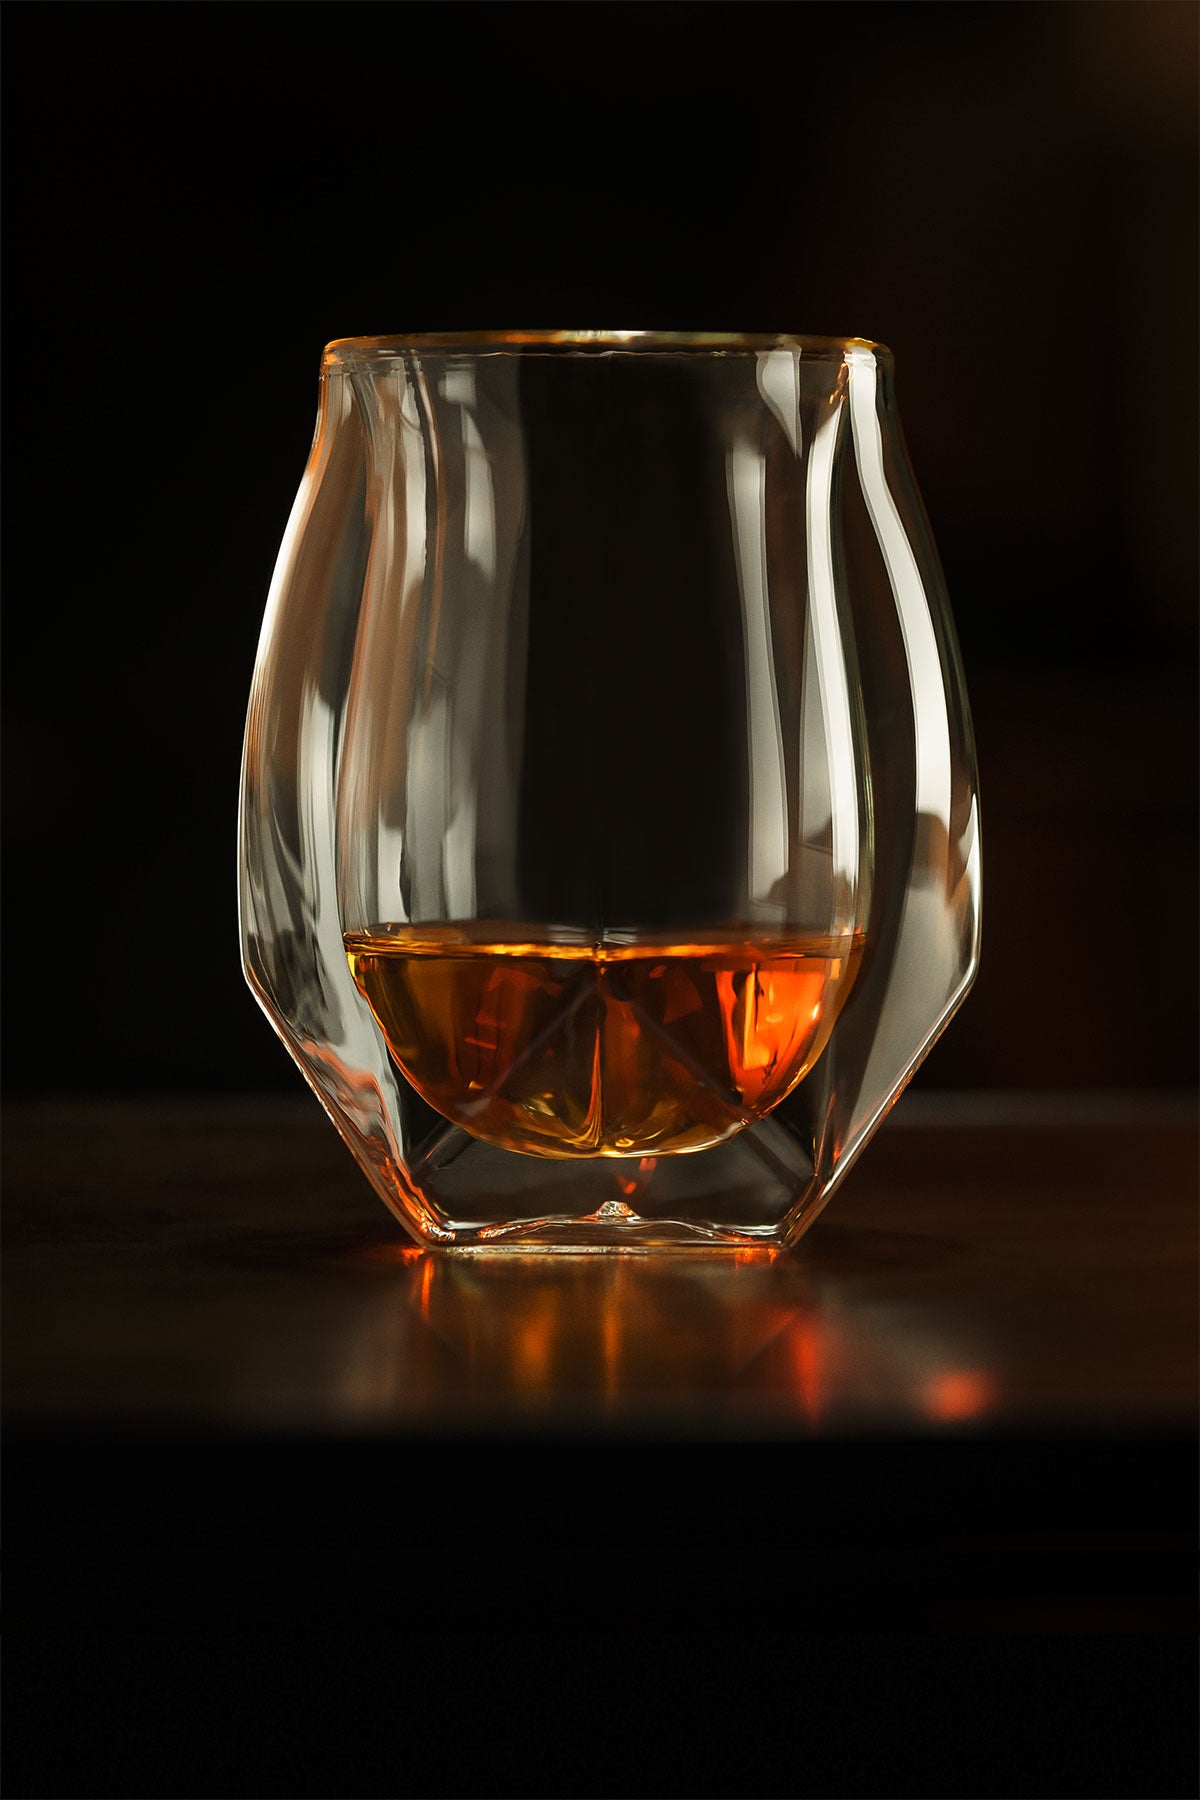 The Norlan Whiskey Glass-good for some whiskeys and not for others